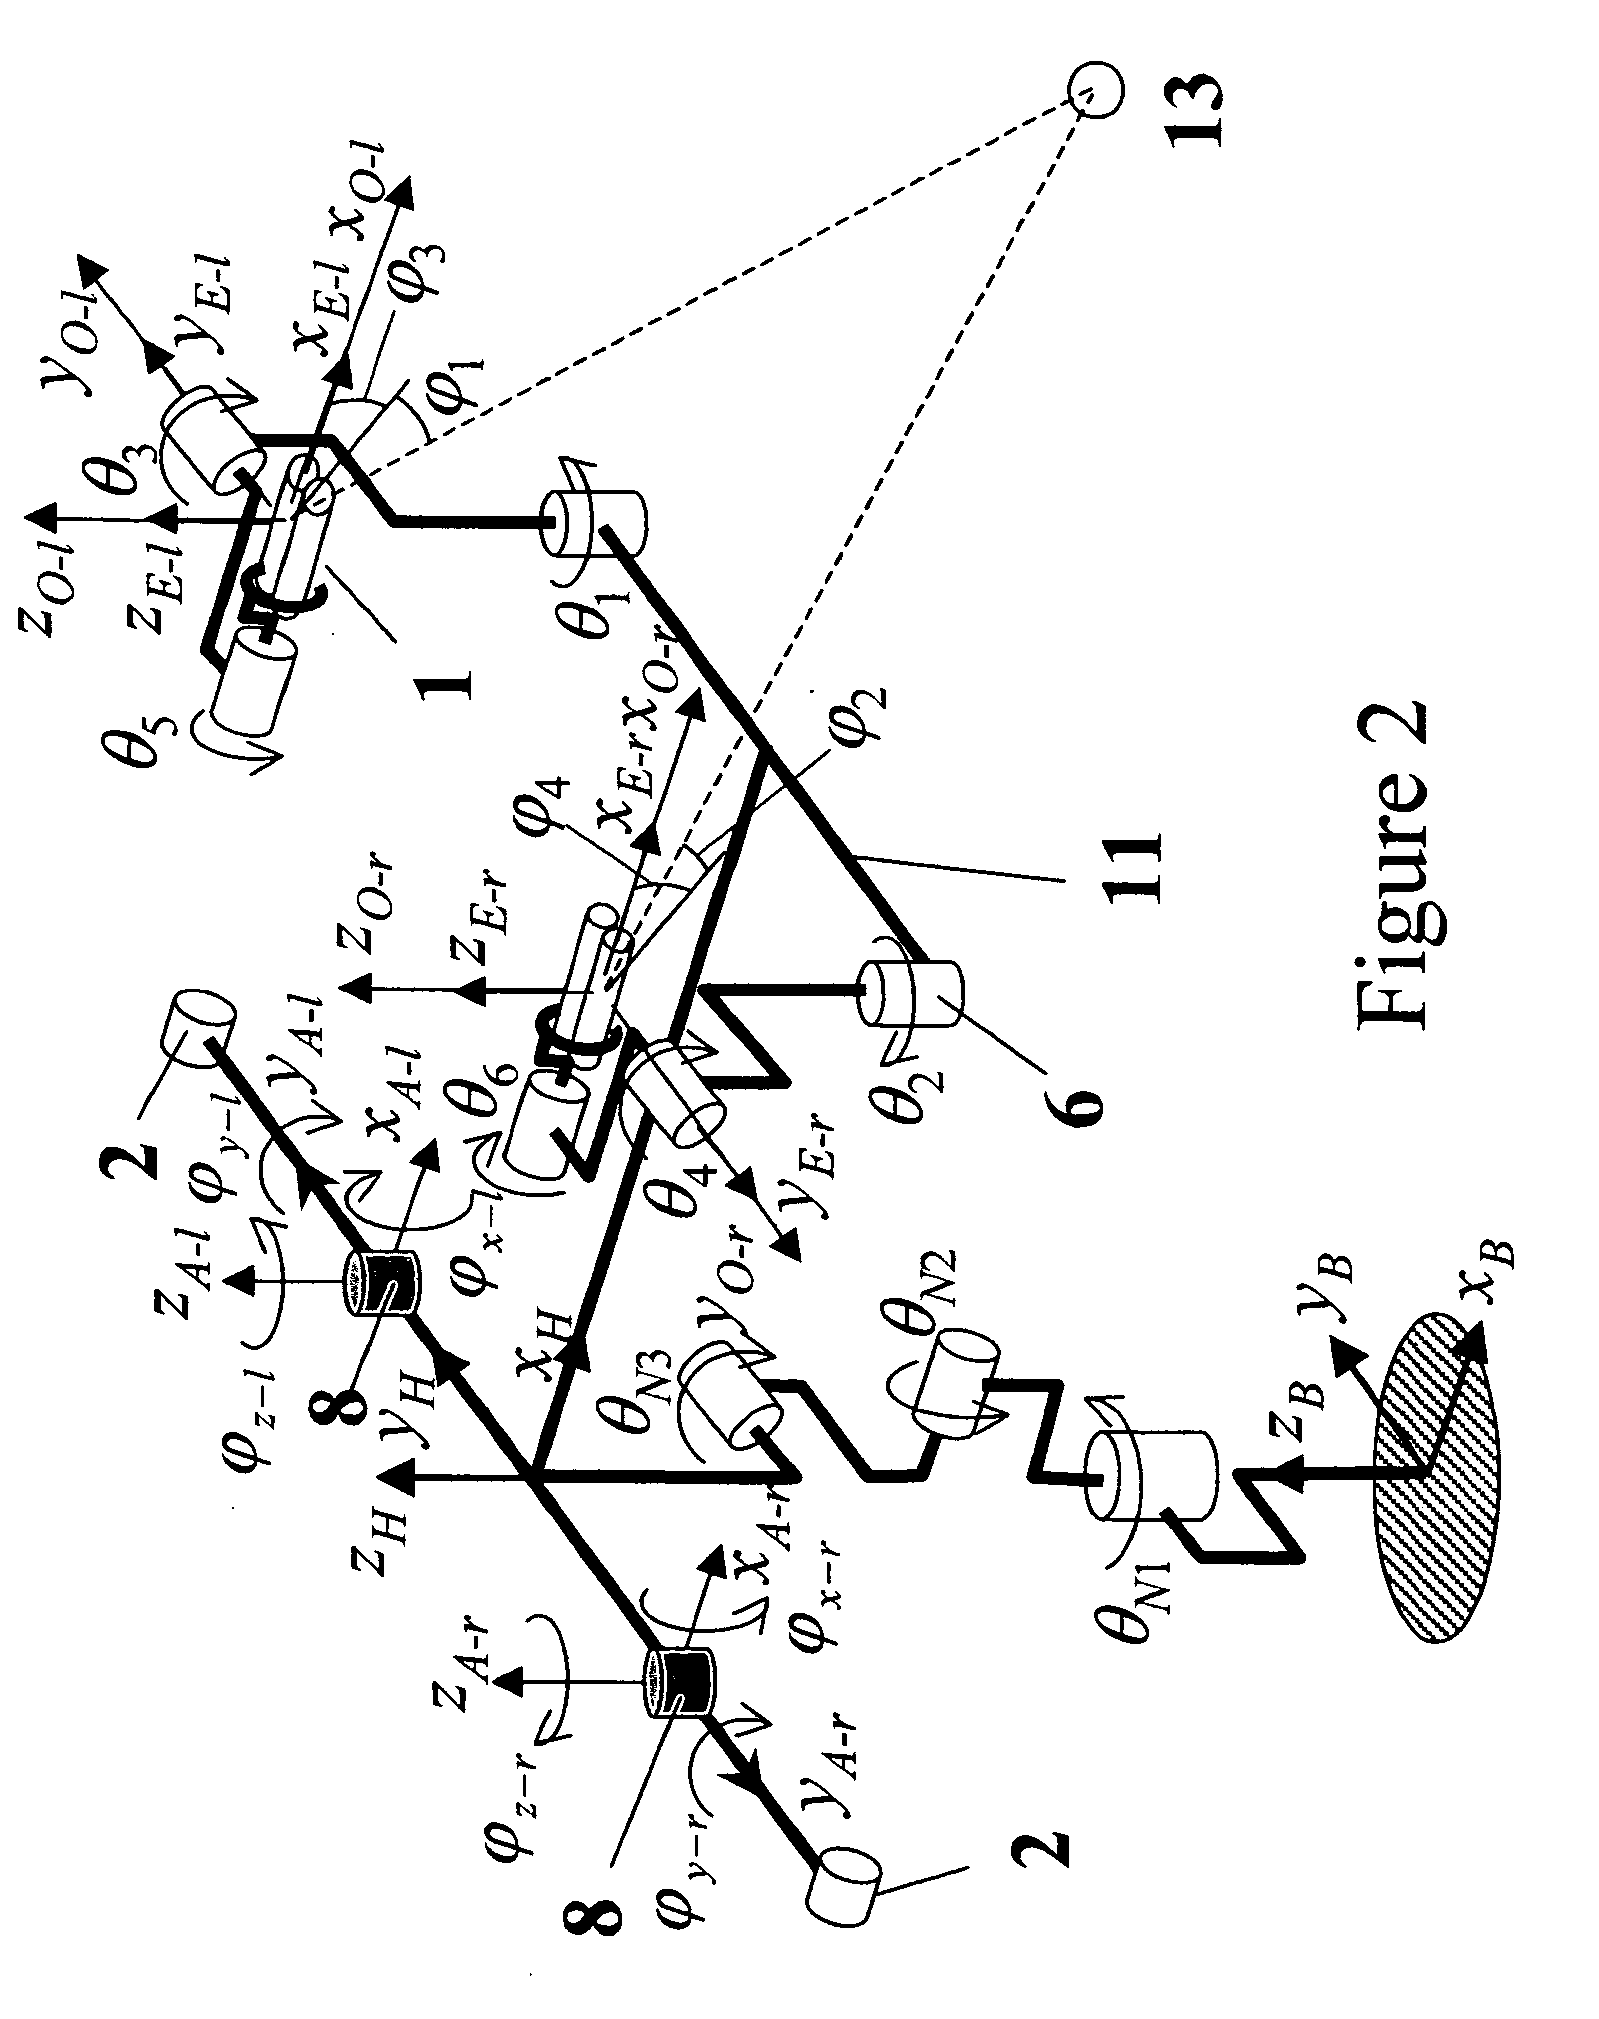 Bionic automatic vision and line of sight control system and method